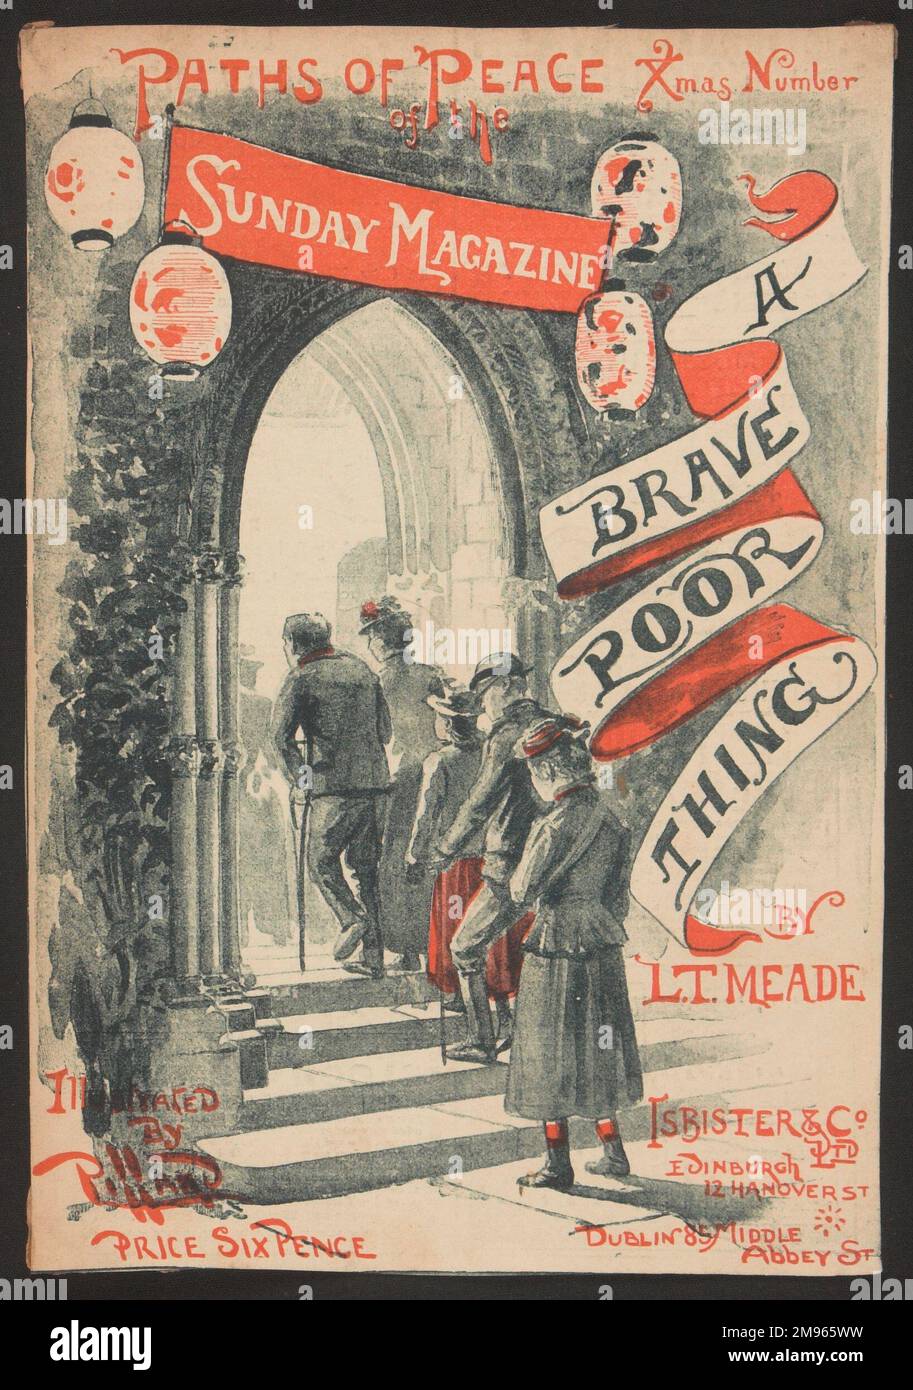 Front cover illustration for the Christmas number of Sunday magazine, entitled 'Paths of Peace Xmas Number'. The magazine features a story called 'A Brave, Poor Thing' by L.T. Meade and the cover image shows a family entering church. Stock Photo